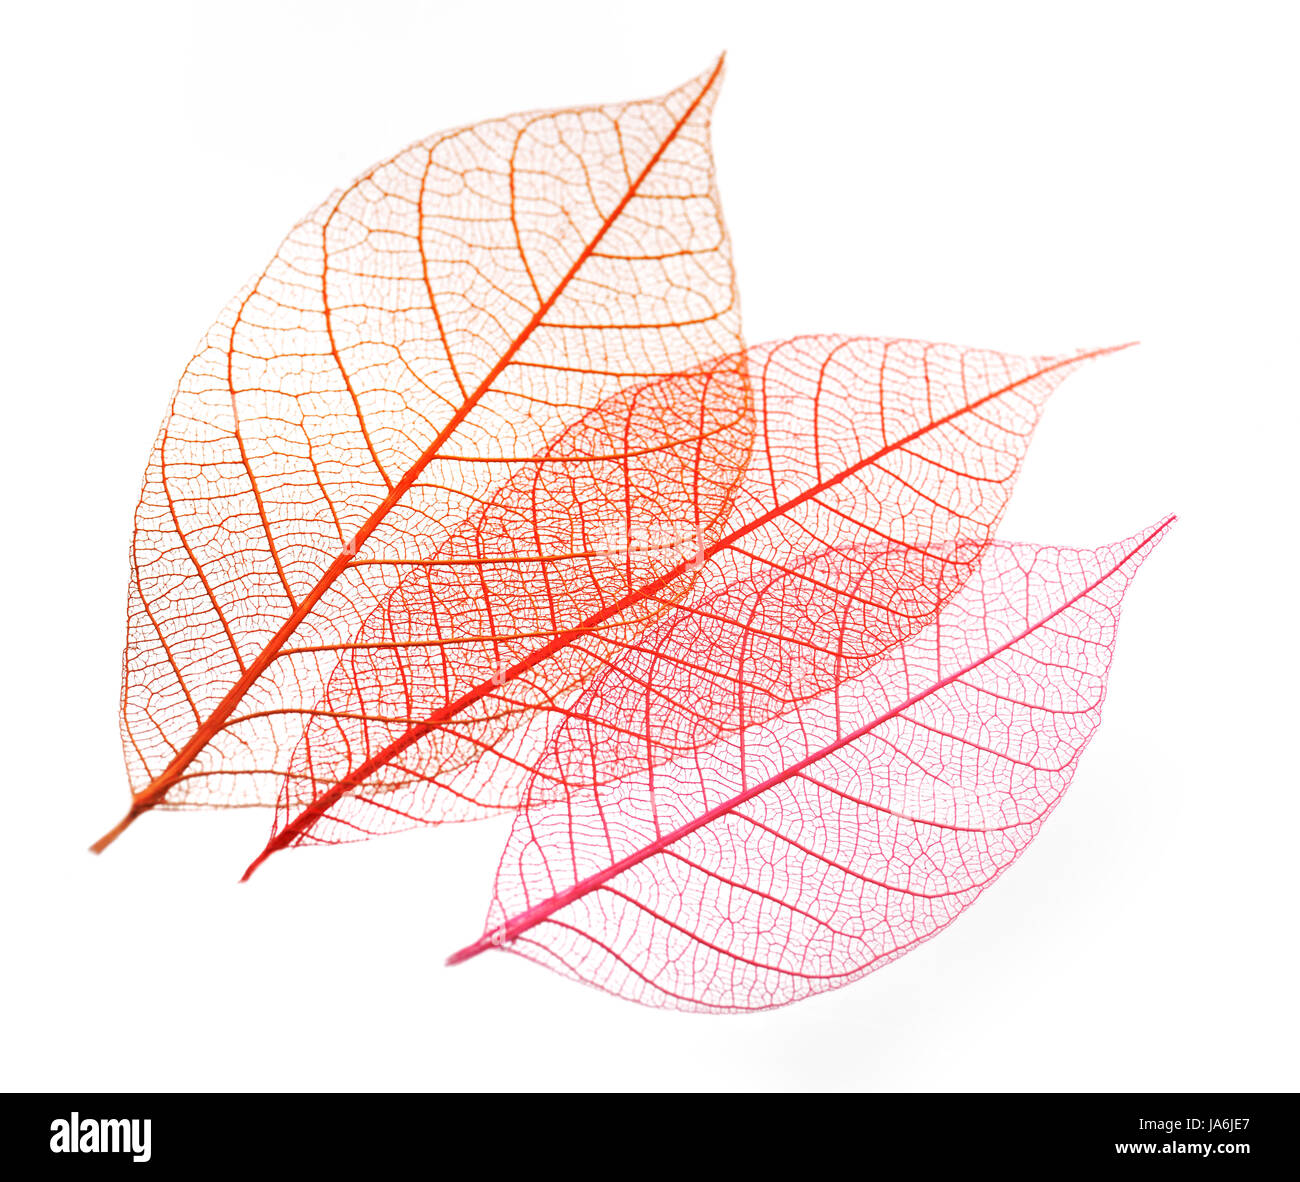 leaves, skeleton, graphic, conspicuous, pictographic, transparent, red, Stock Photo